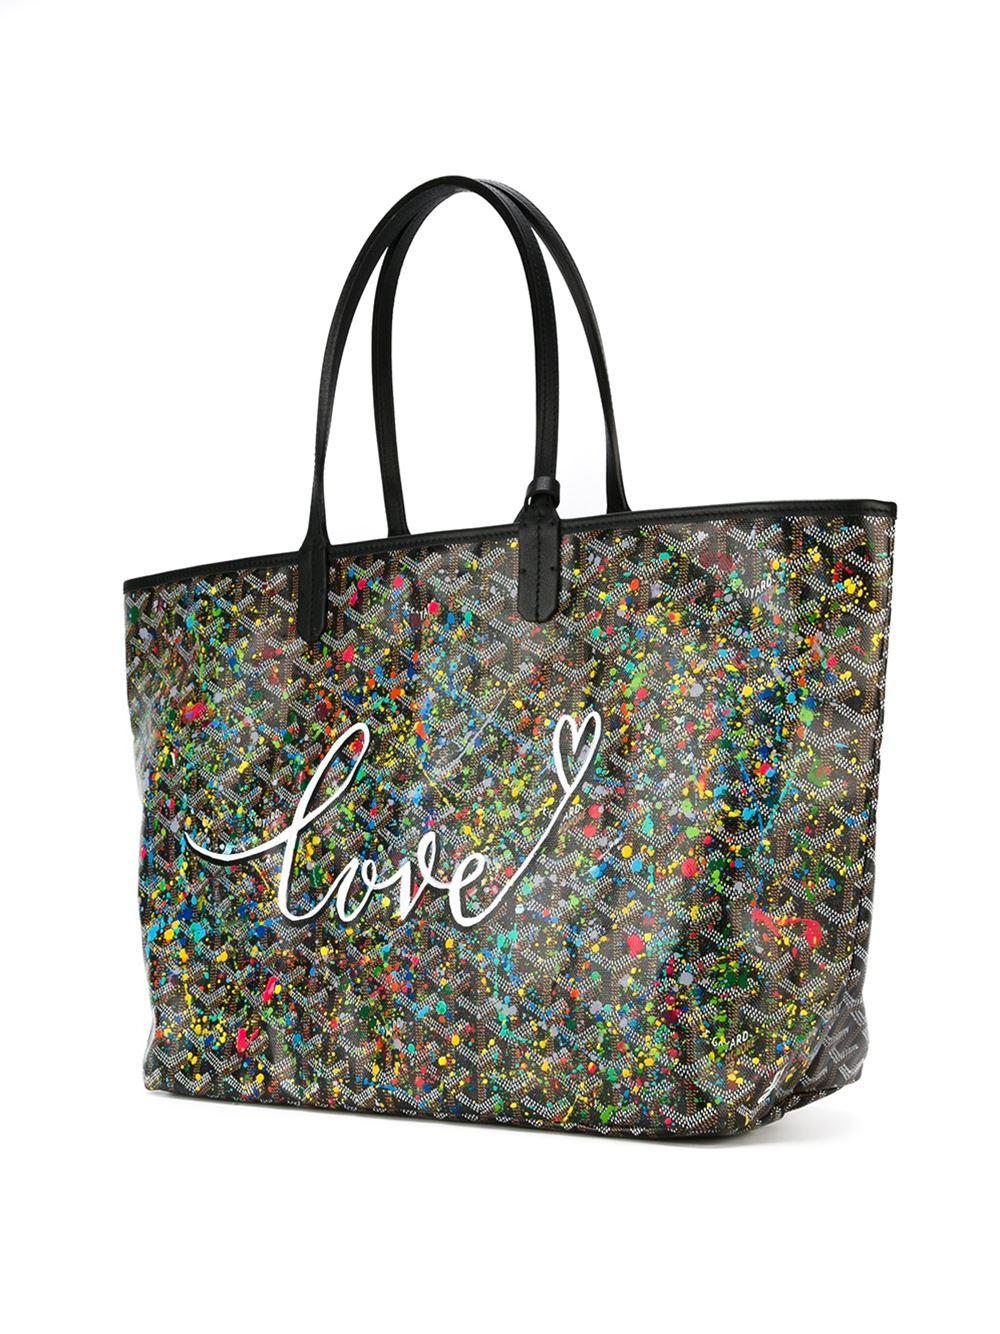 Crafted from Goyardine Canvas, a coloured textile made from cotton, linen and hemp, this black and brown Monogram St Louis tote Bag is adorned with a hand-painted 'splattered paint' design and the word 'Love' in the style of Jackson Pollock, as a